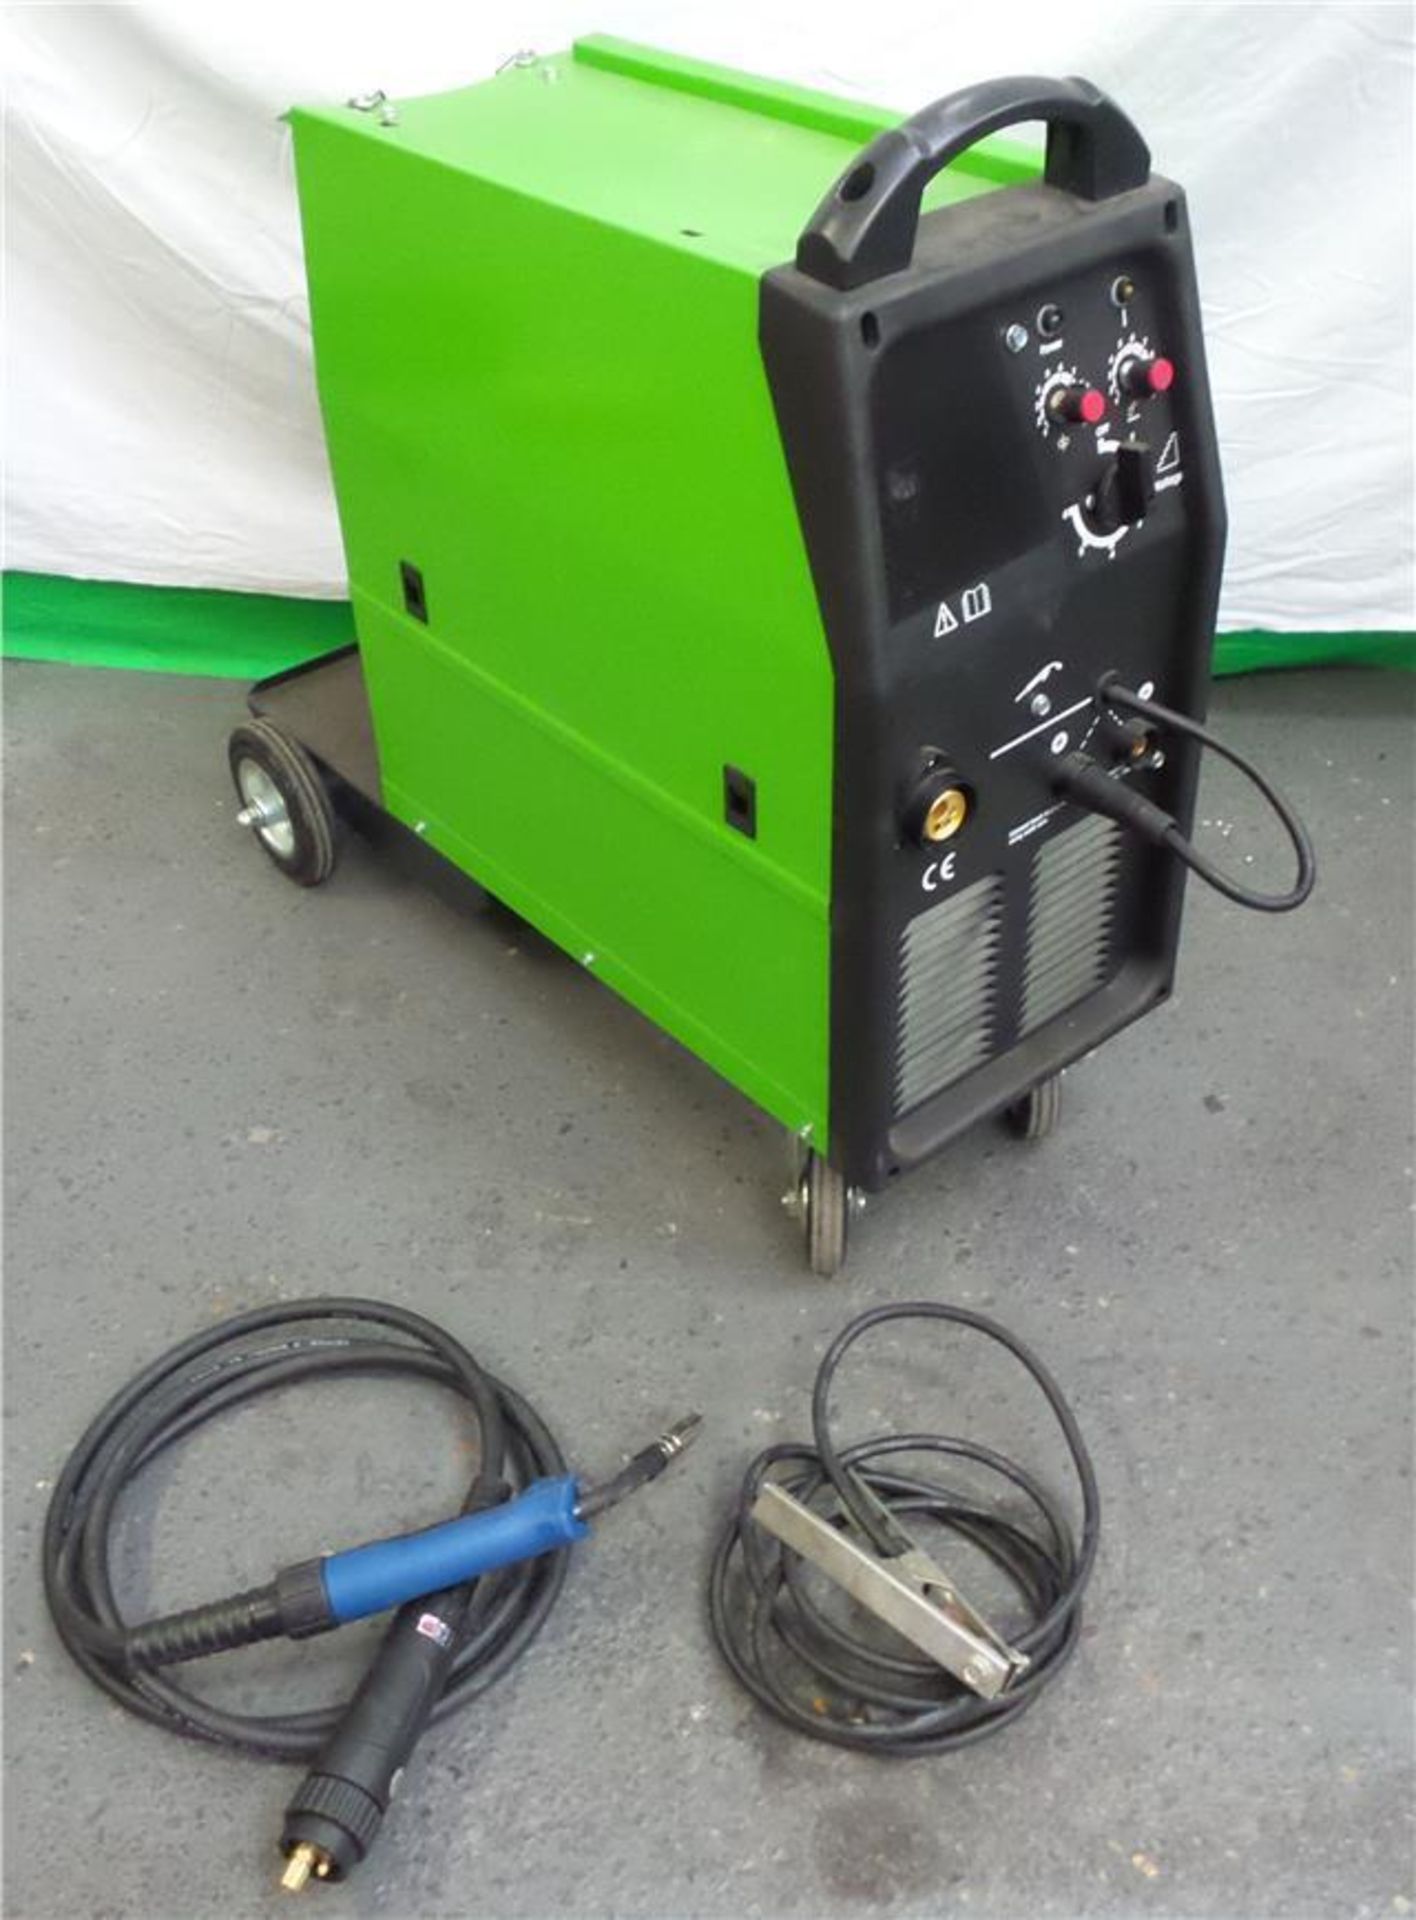 AutoPlus 211DP- MIG Welder 210A (Ref 1113) *** NEW Ex-Sample *** £35.00 + Vat, Delivery Charge Can